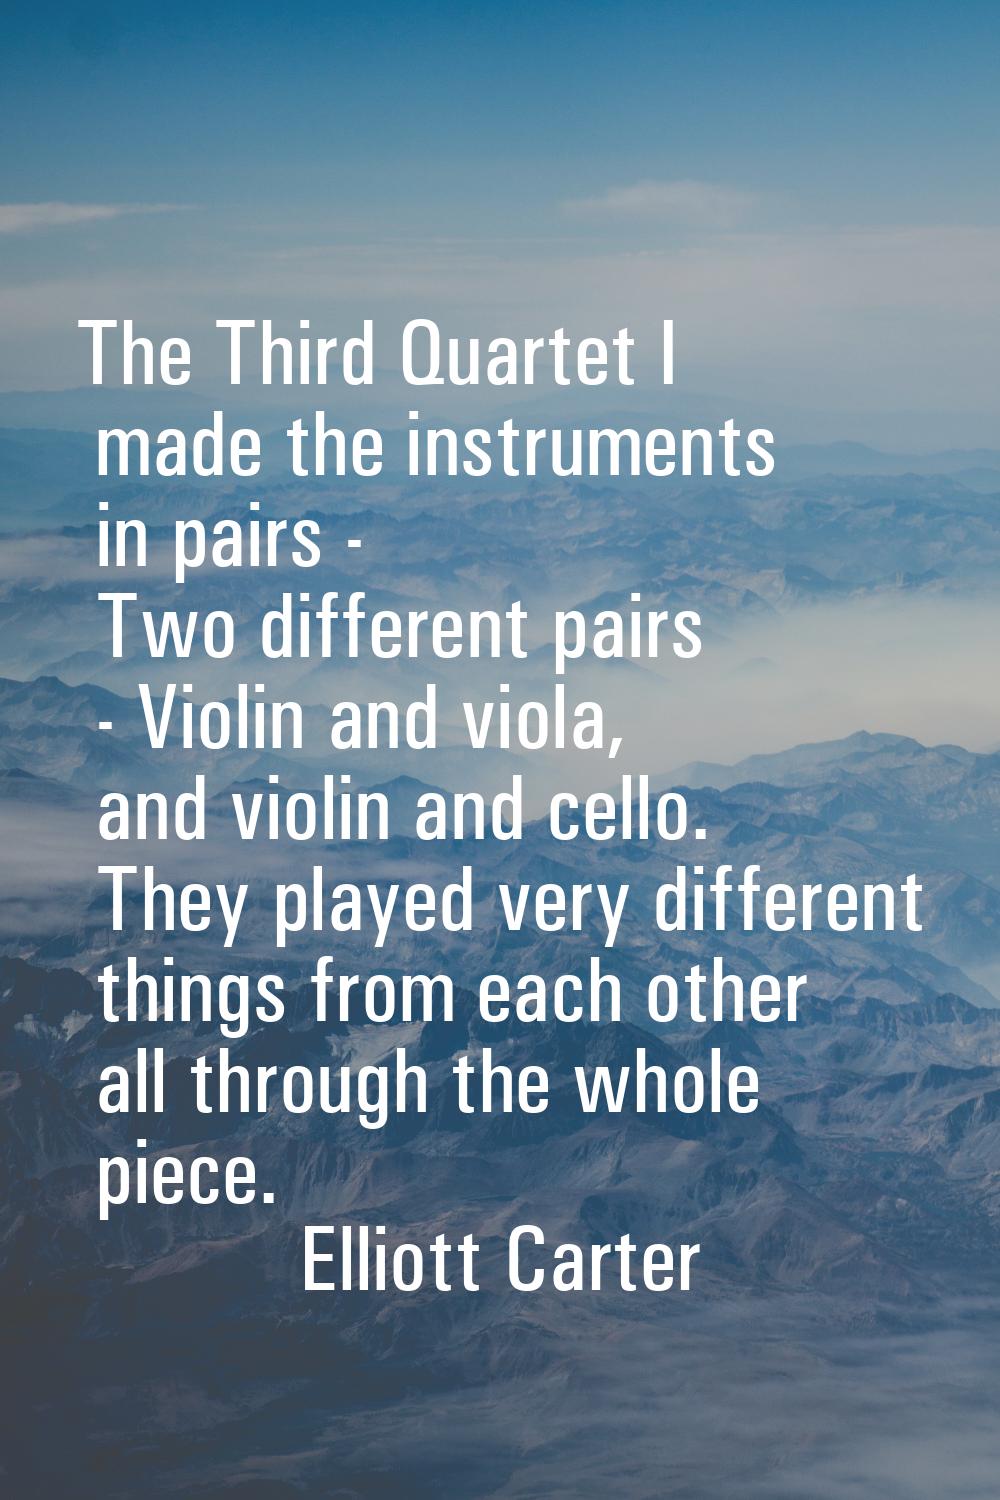 The Third Quartet I made the instruments in pairs - Two different pairs - Violin and viola, and vio